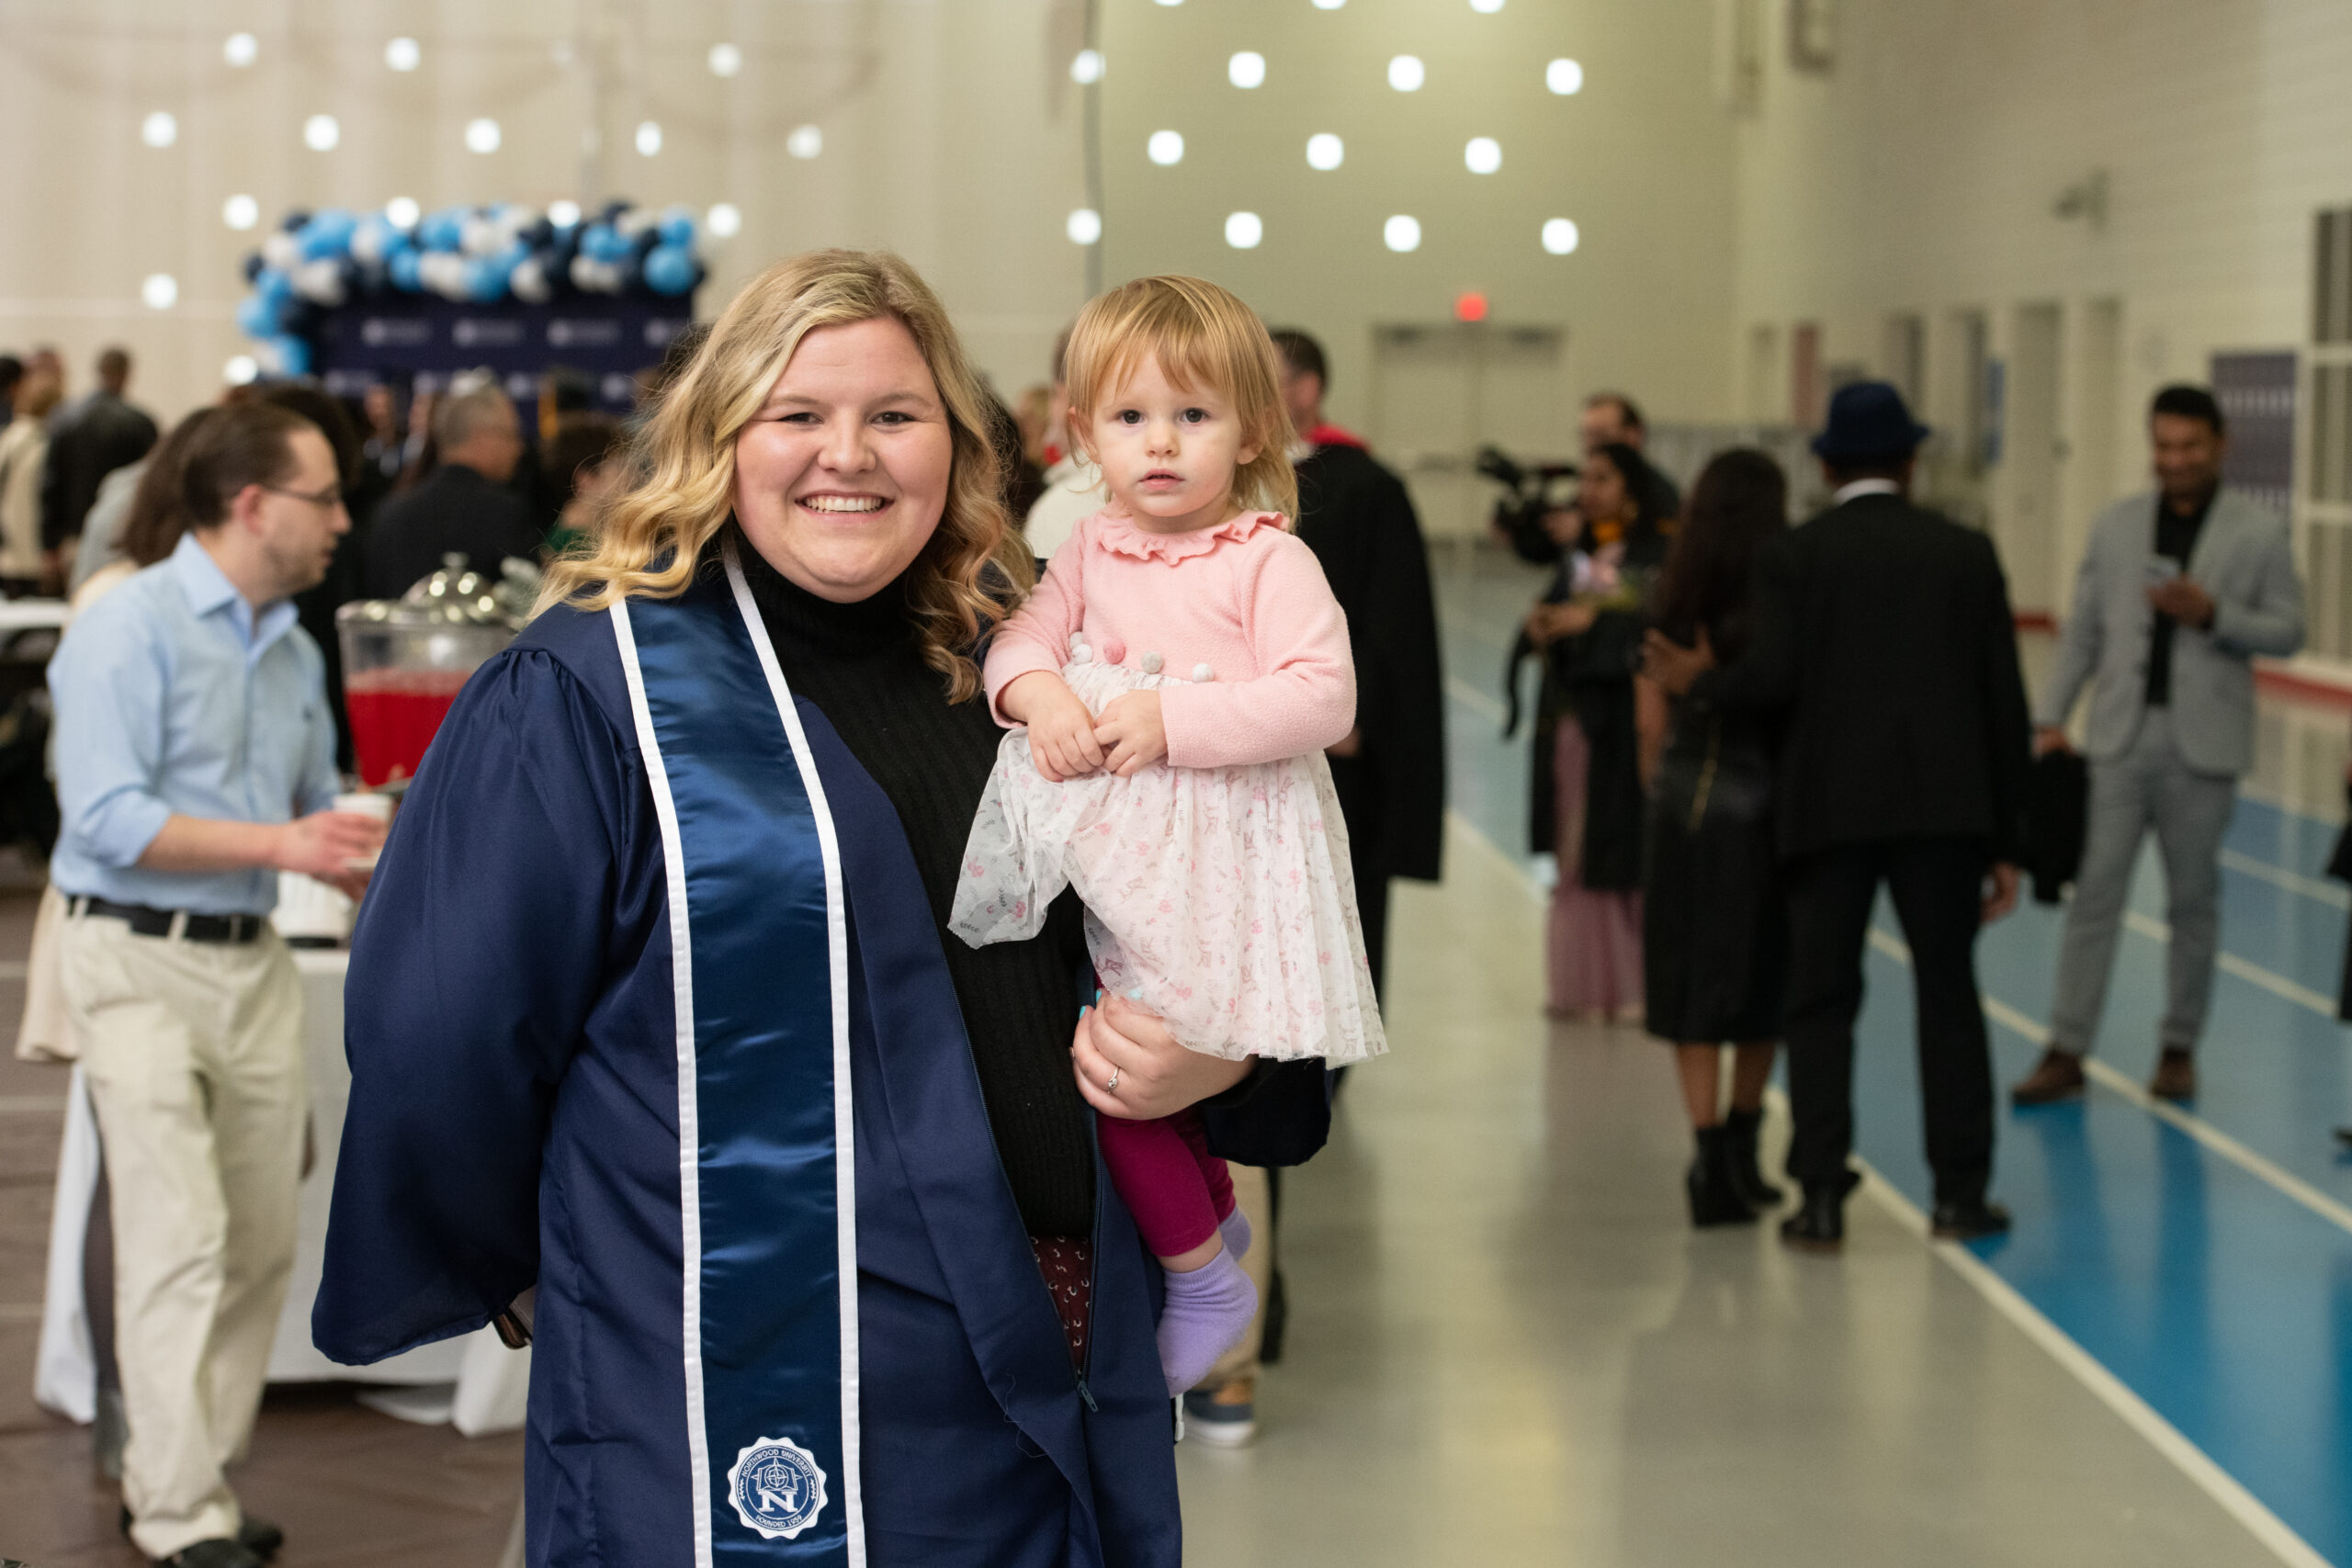 Northwood Online student holding her baby in her cap and gown attire